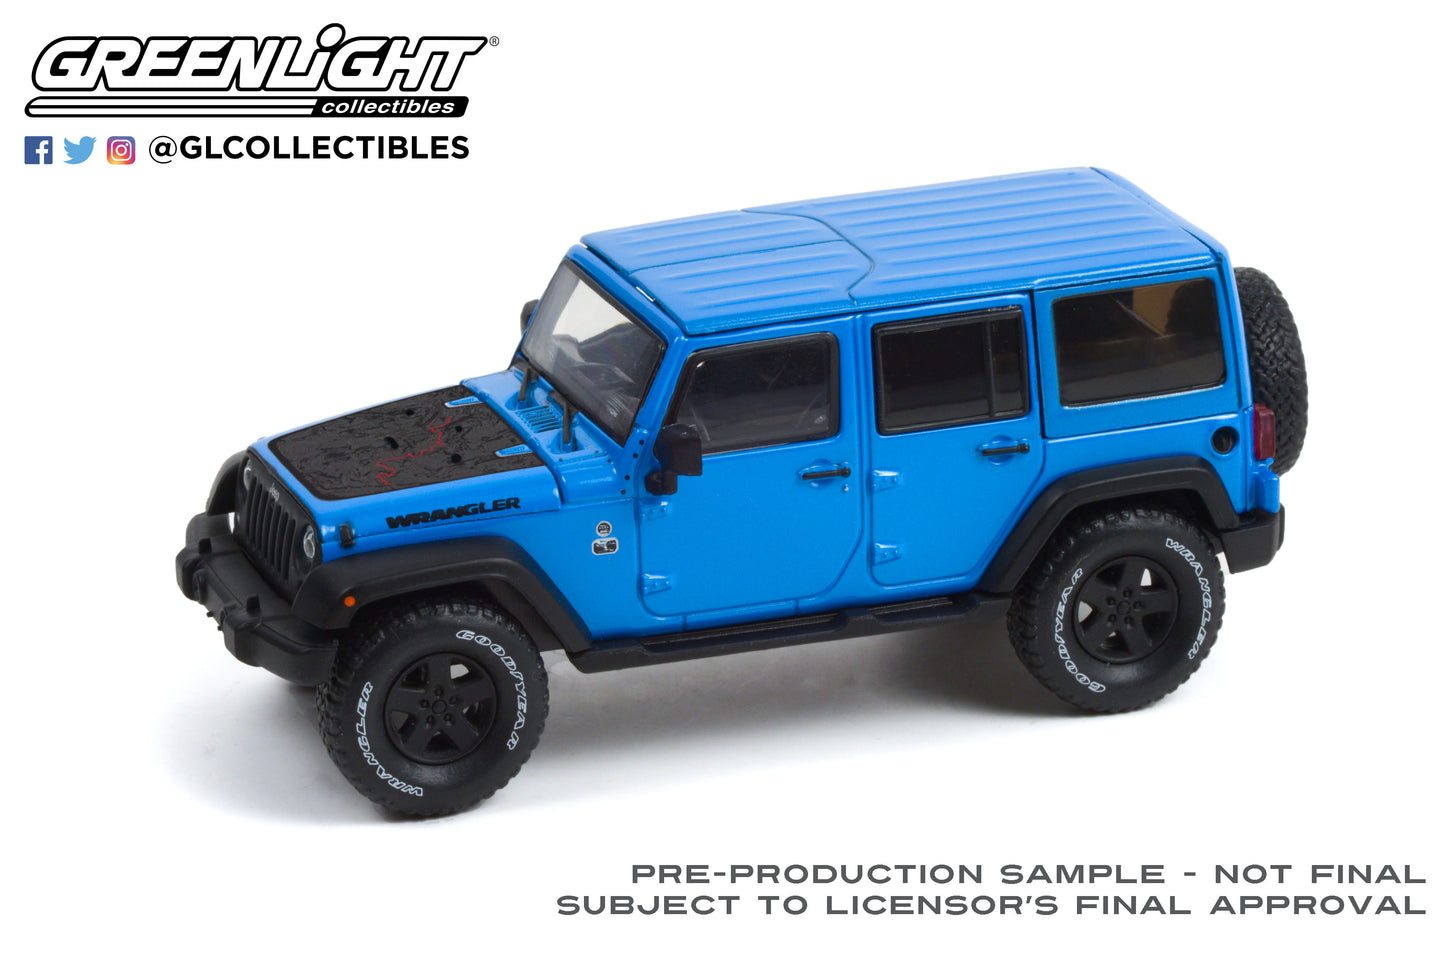 GreenLight 1:43 2016 Jeep Wrangler Unlimited Black Bear Edition - Jeep Official Badge of Honor - Black Bear Pass, Telluride, Colorado - Hydro Blue Pearl 86198